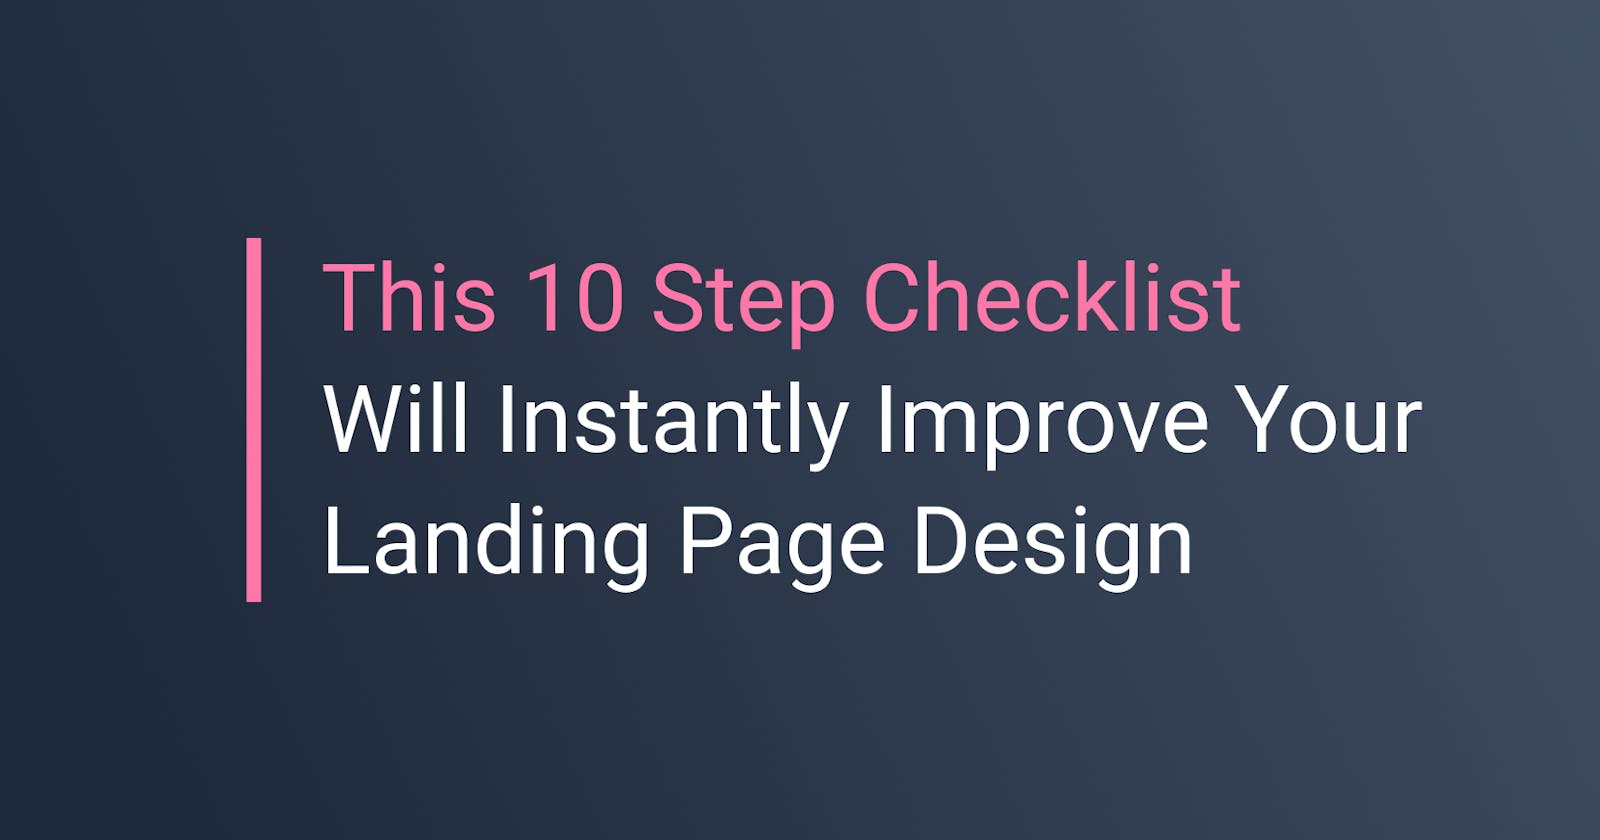 This 10 Step Checklist Will Instantly Improve Your Landing Page Design